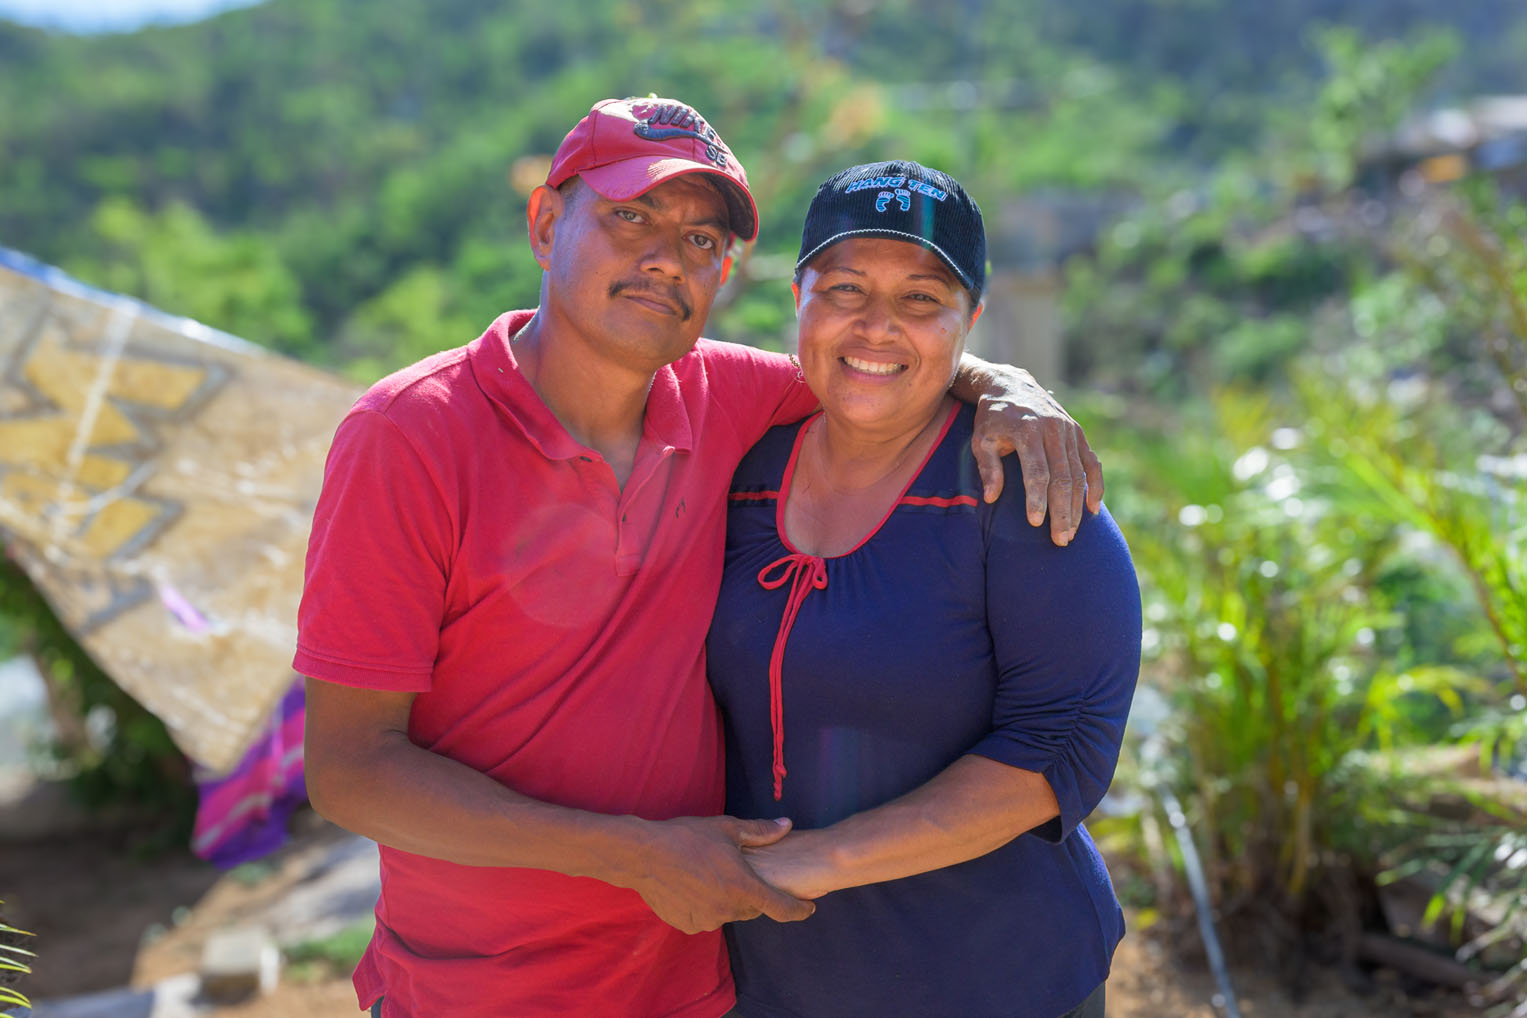 Fernando and Claudia Flores, who were provided shelter through our tarping teams, received Jesus Christ as Lord and Savior.